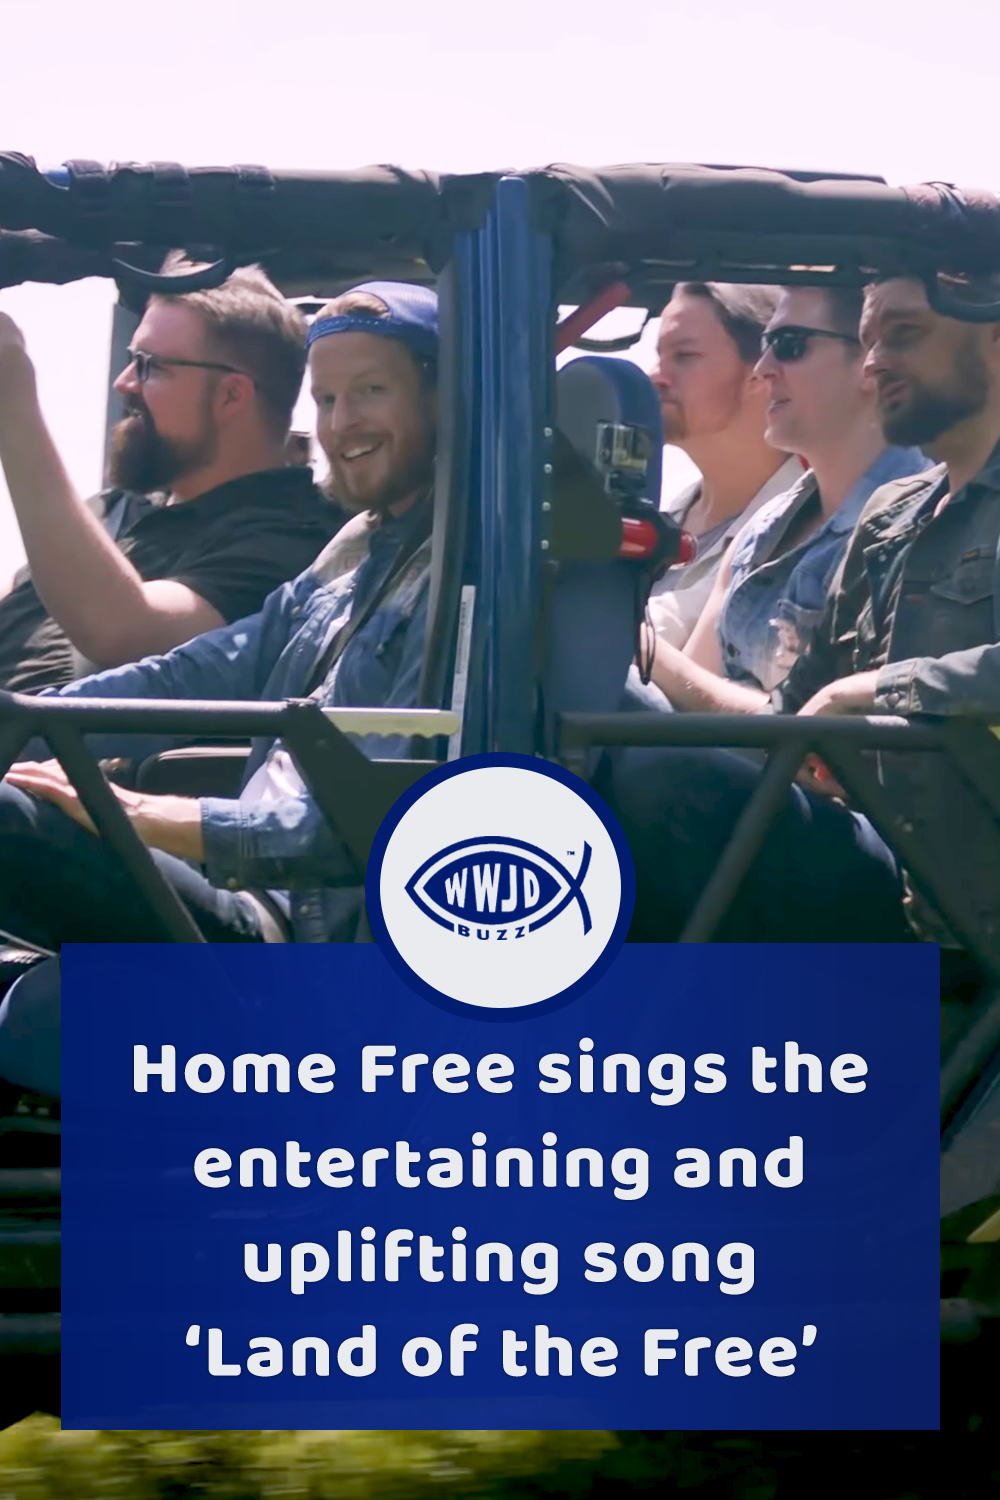 Home Free sings the entertaining and uplifting song ‘Land of the Free’